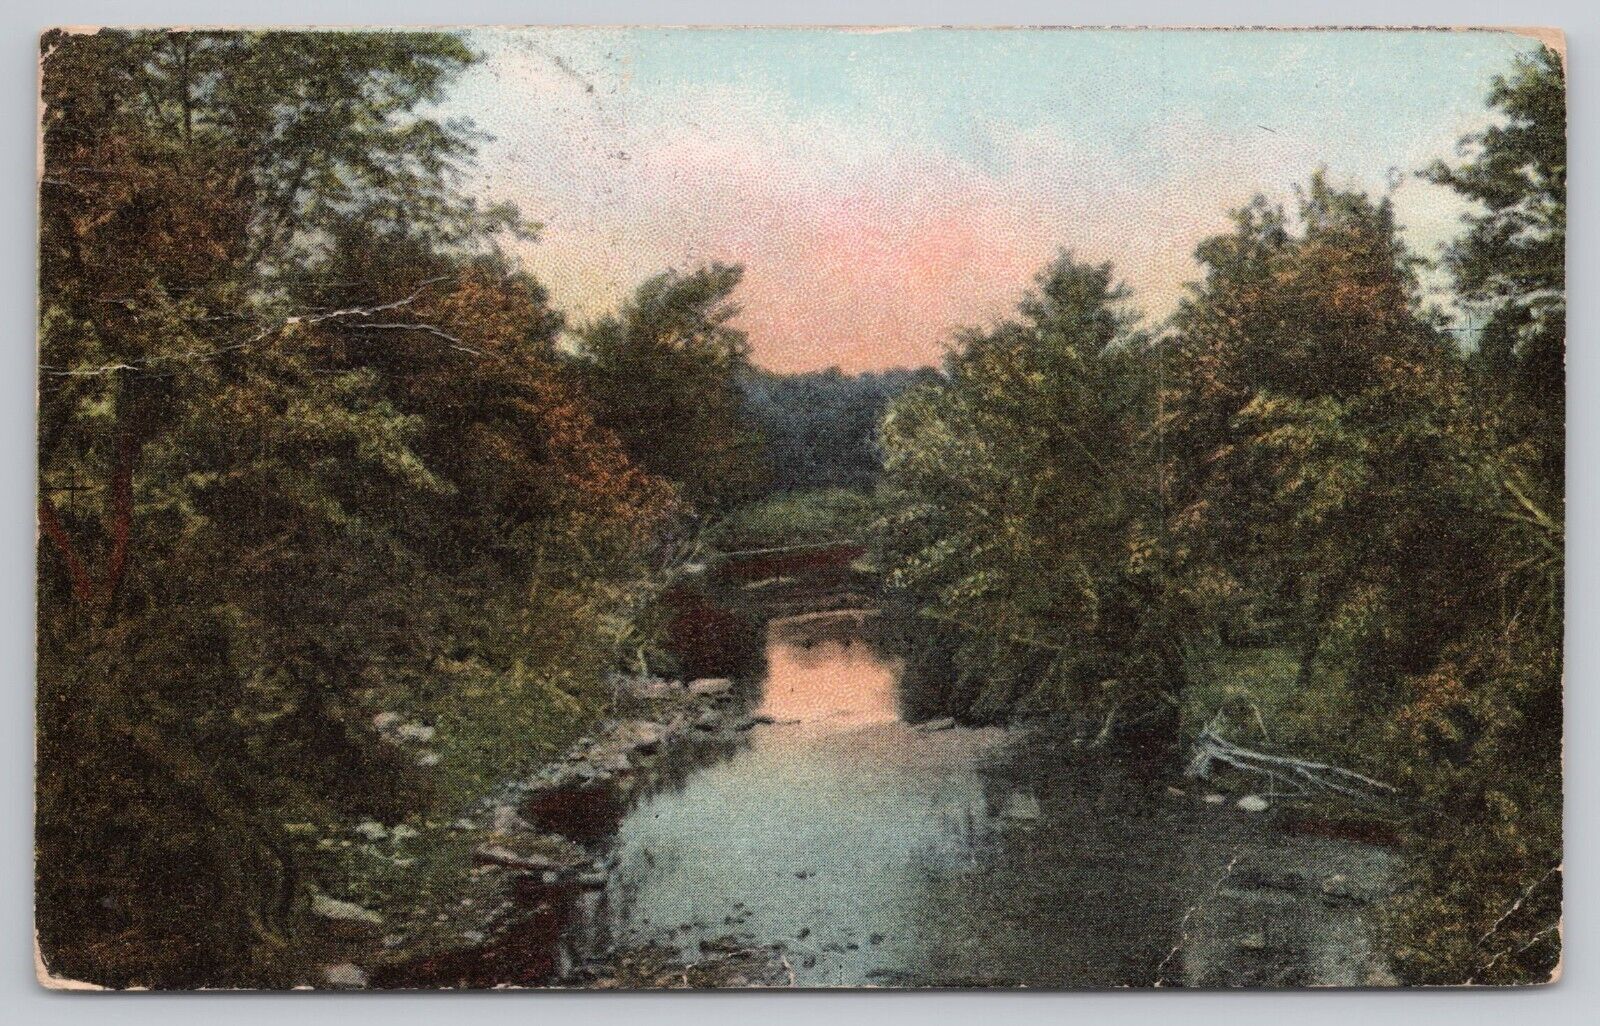 Postcard Beautiful Stream with Woods. Vintage PM 1919 Bancor Railway Post Office